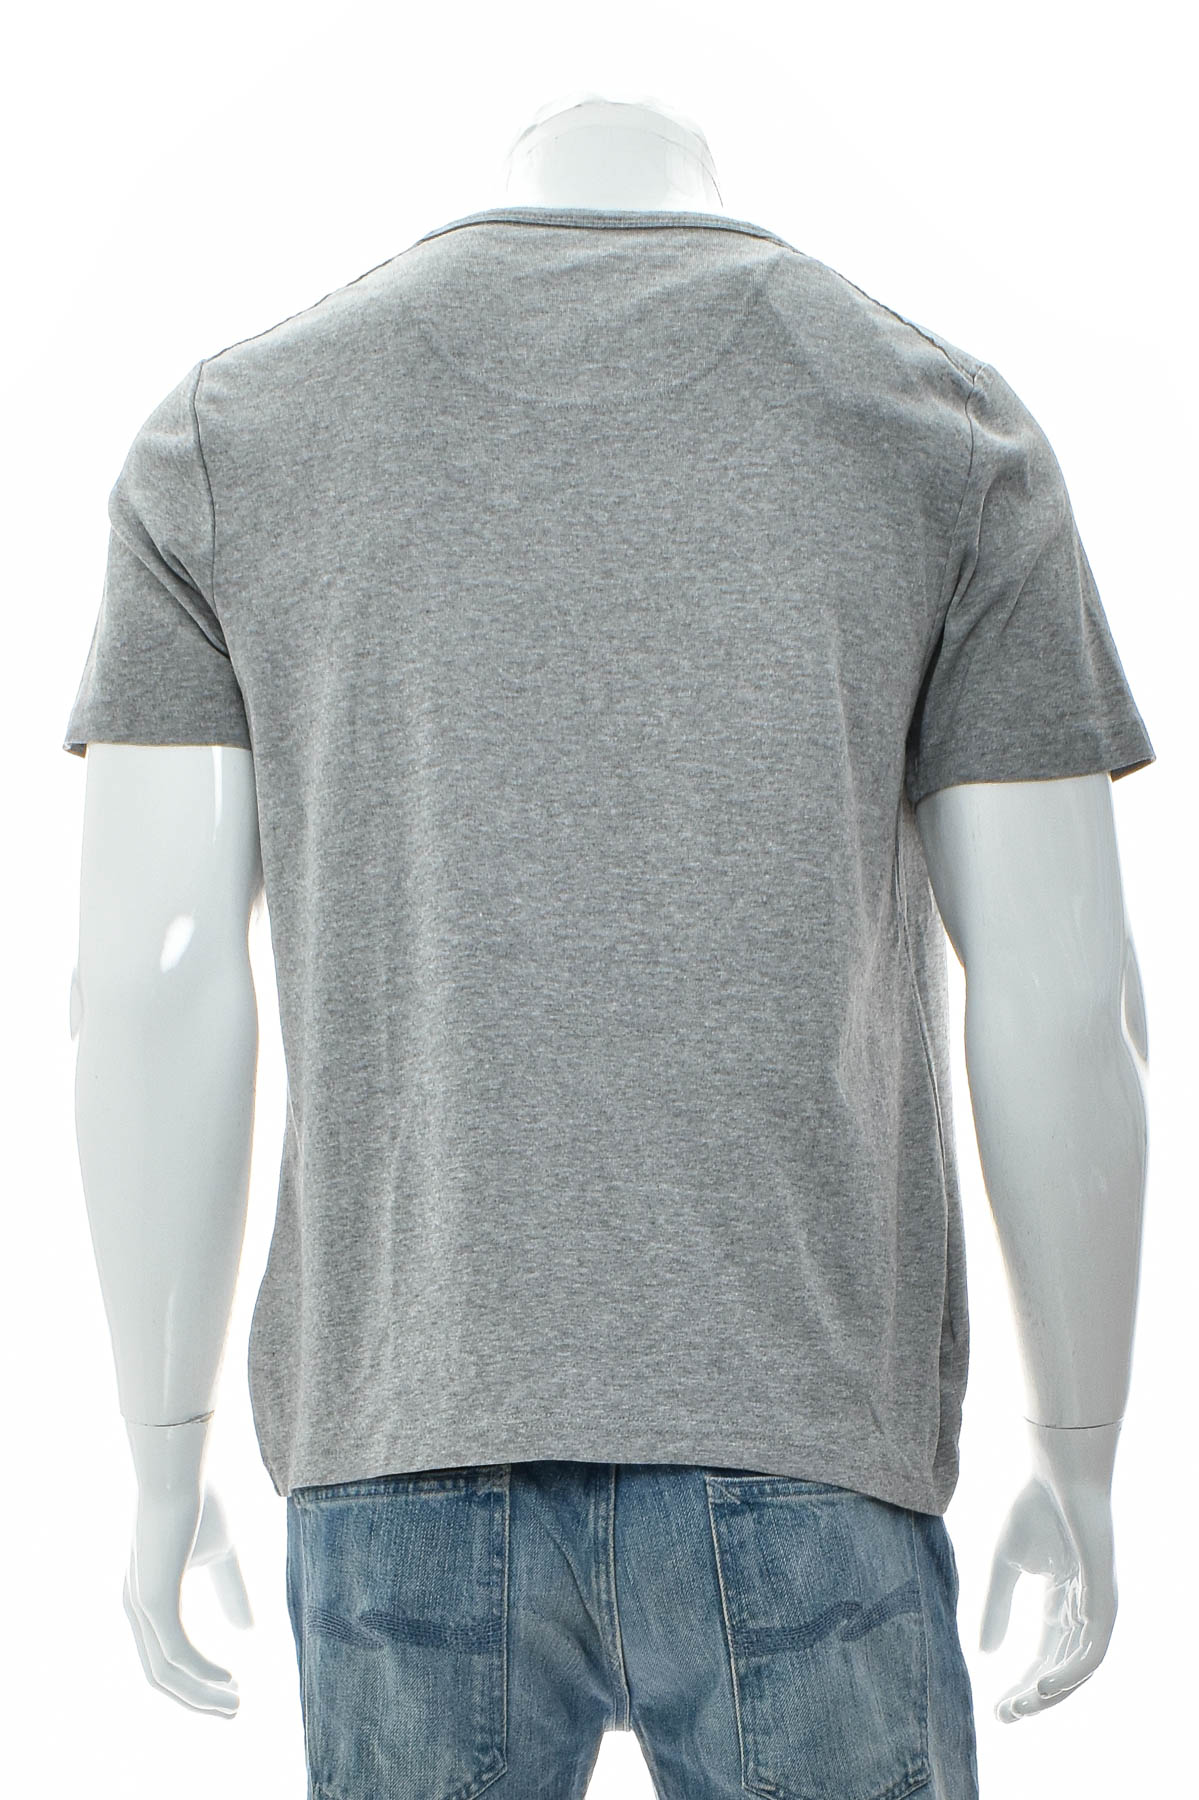 Men's T-shirt - Coolwater - 1